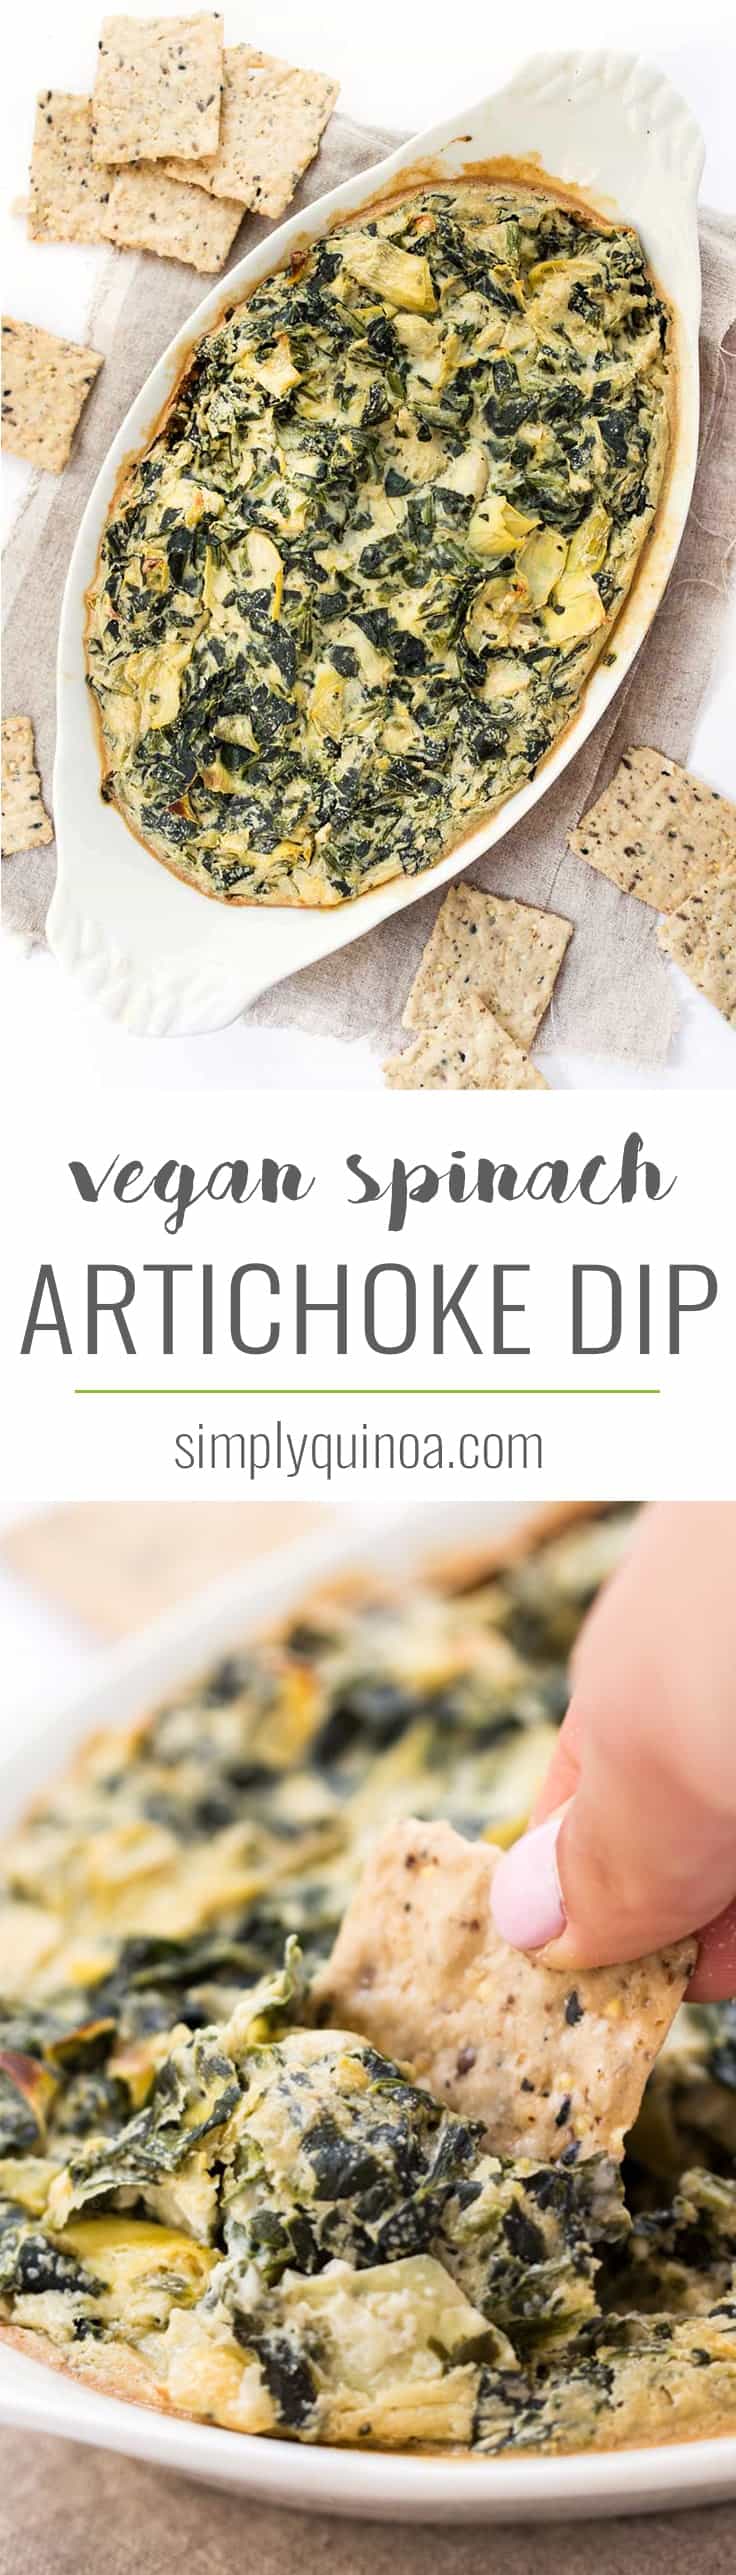 This easy VEGAN Spinach Artichoke Dip is made with less than 10 ingredients, cooks in just about 30 minutes and tastes just like the traditional recipe!